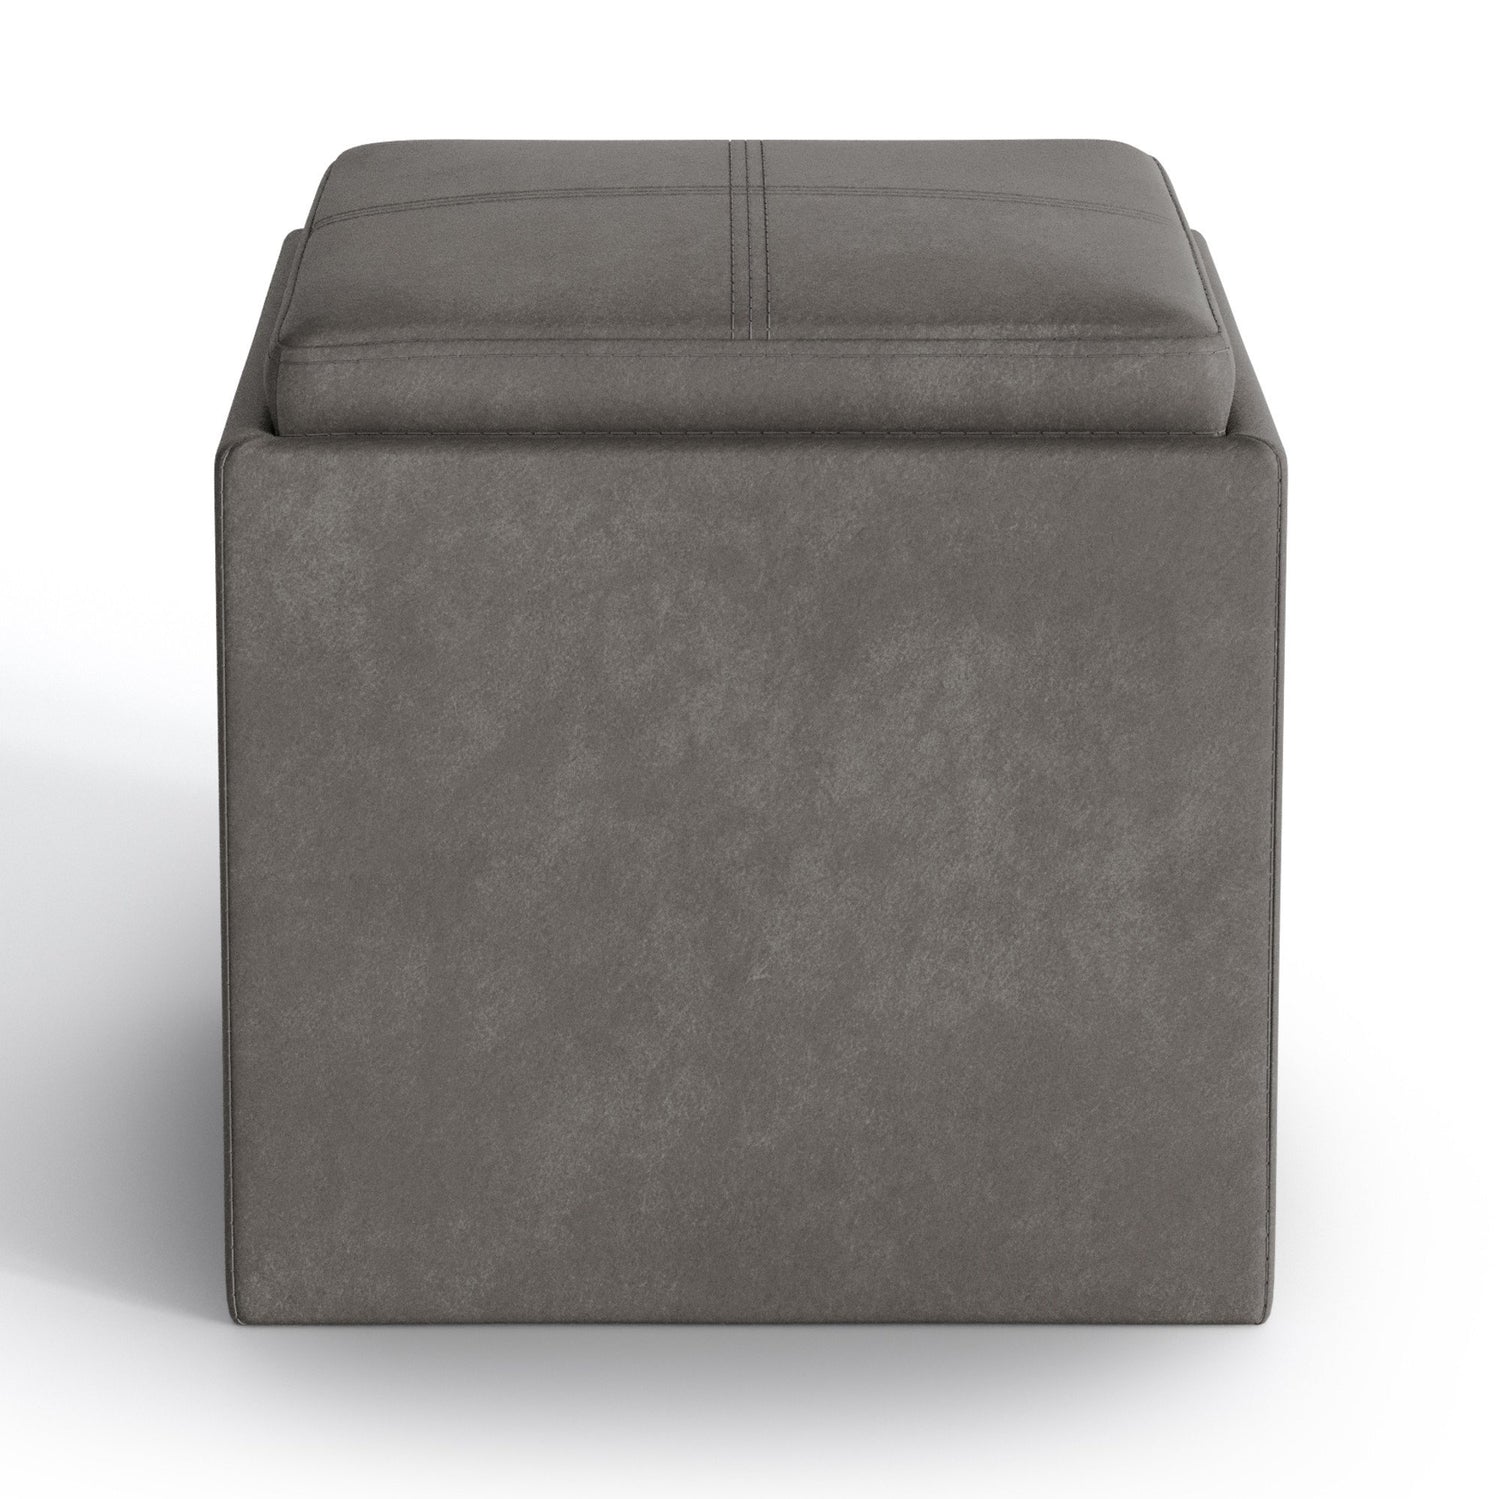 Distressed Slate Grey Distressed Vegan Leather | Rockwood Vegan Leather Cube Storage Ottoman with Tray